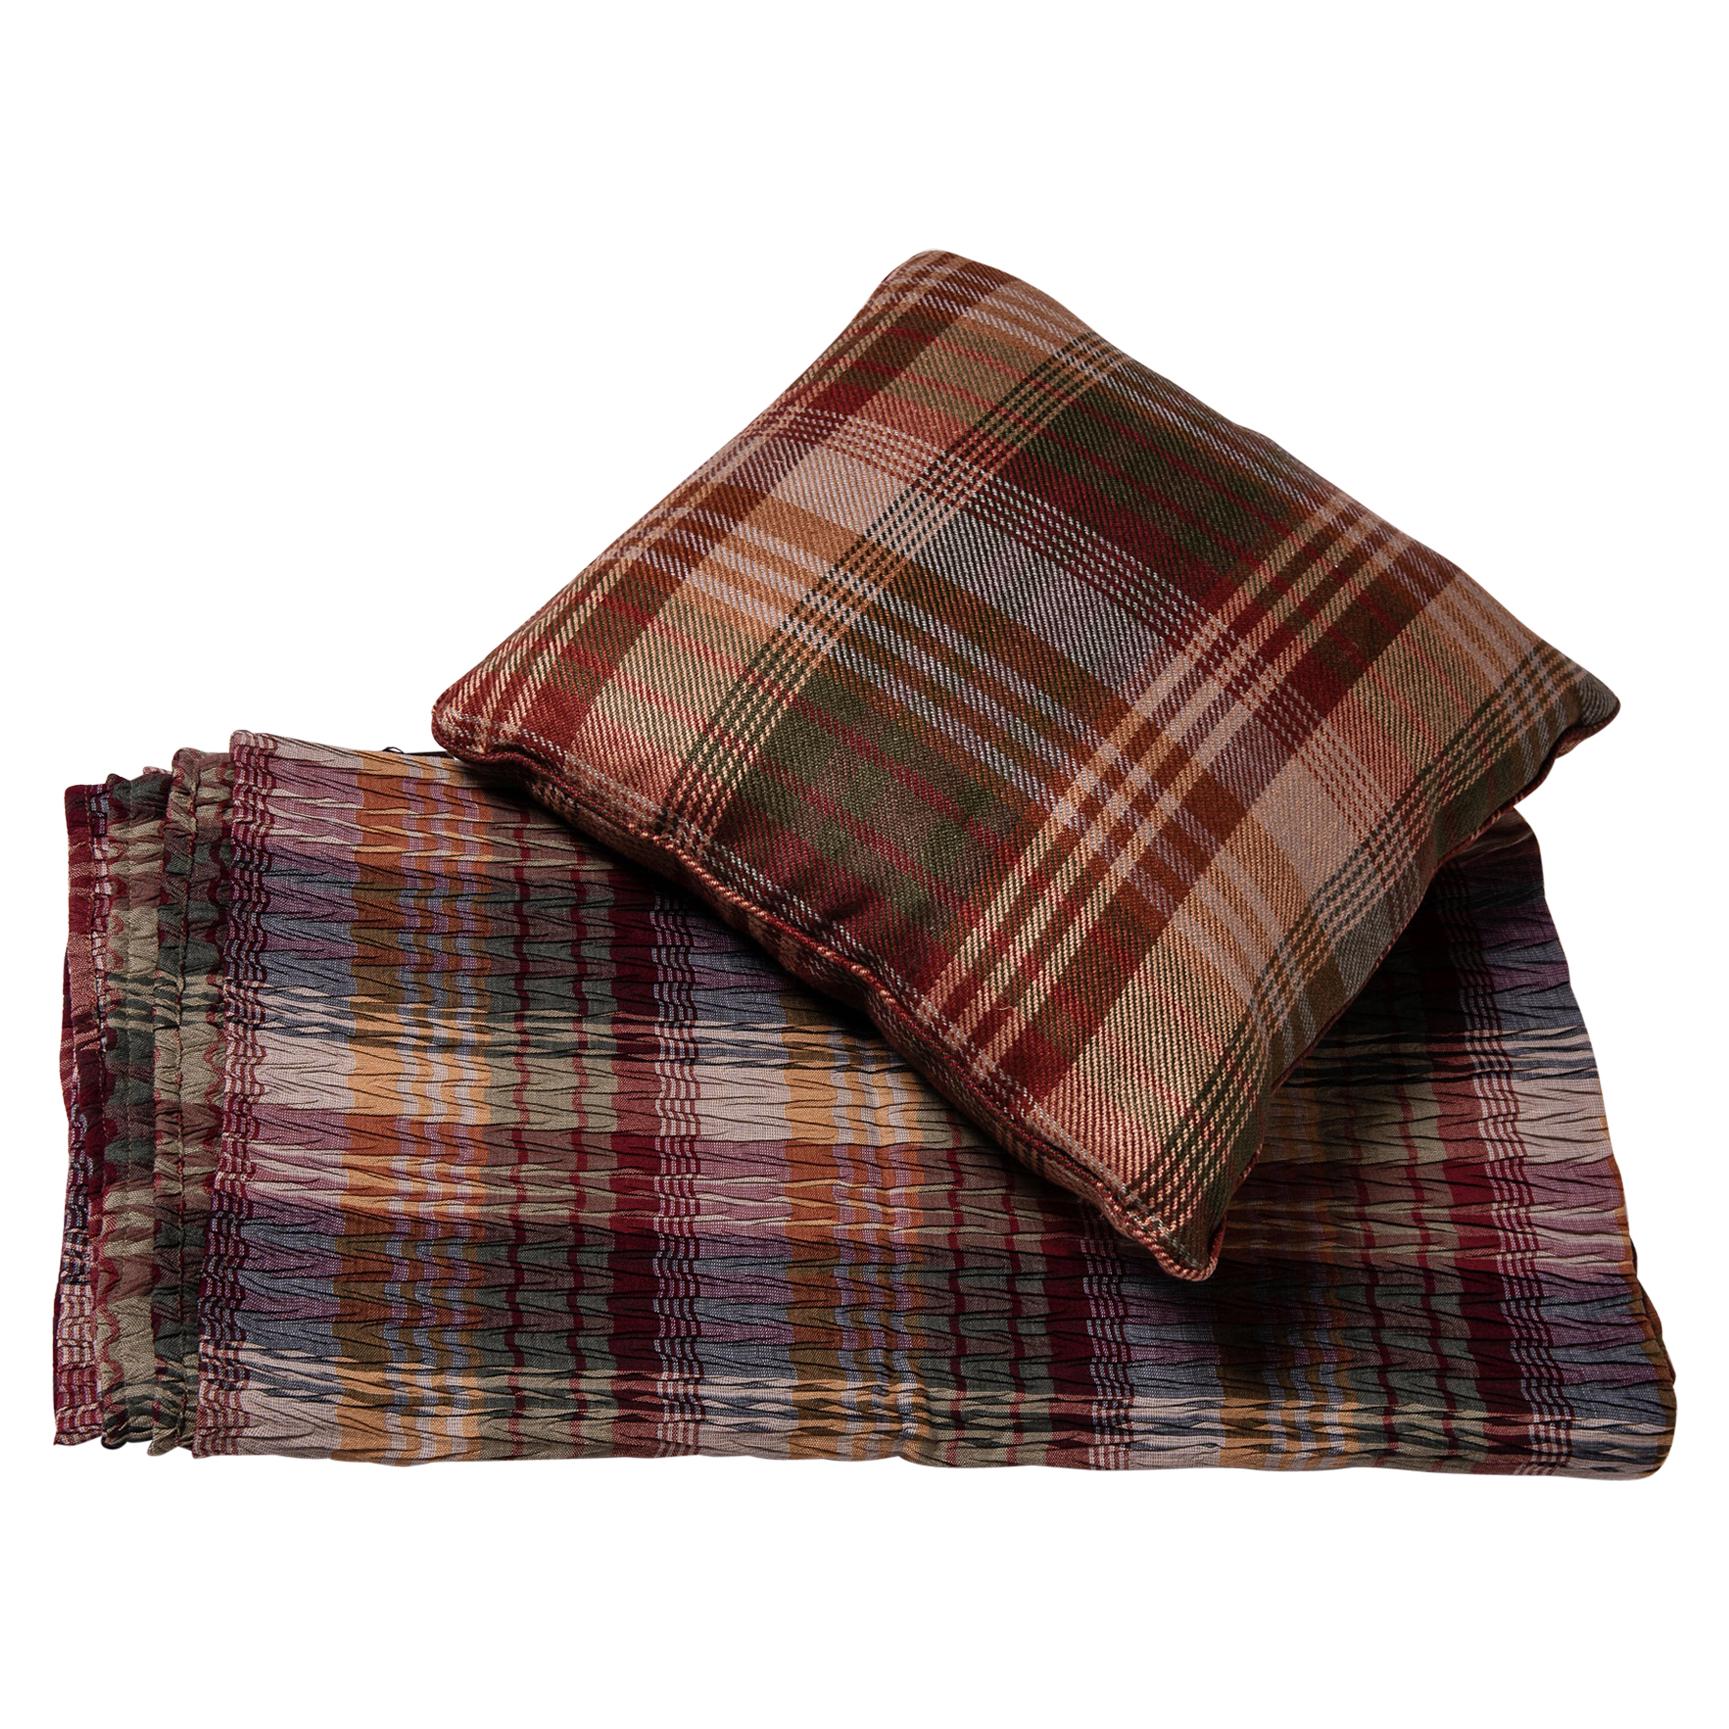   MULBERRY Tartan Cover or Plaid with Pillow 